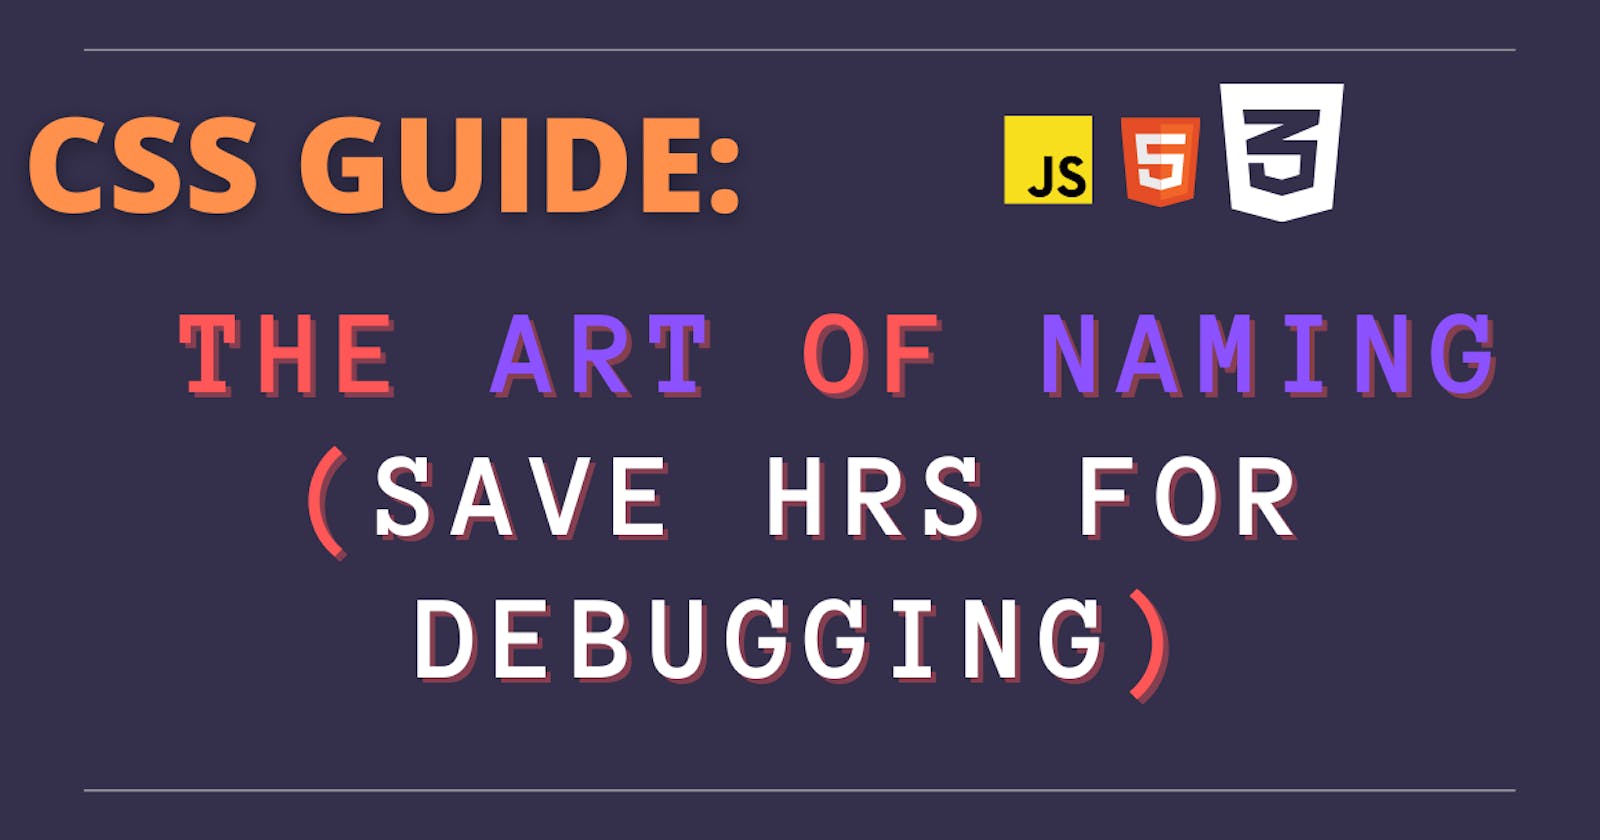 CSS GUIDE: The Art of Naming (Save hrs for debugging)